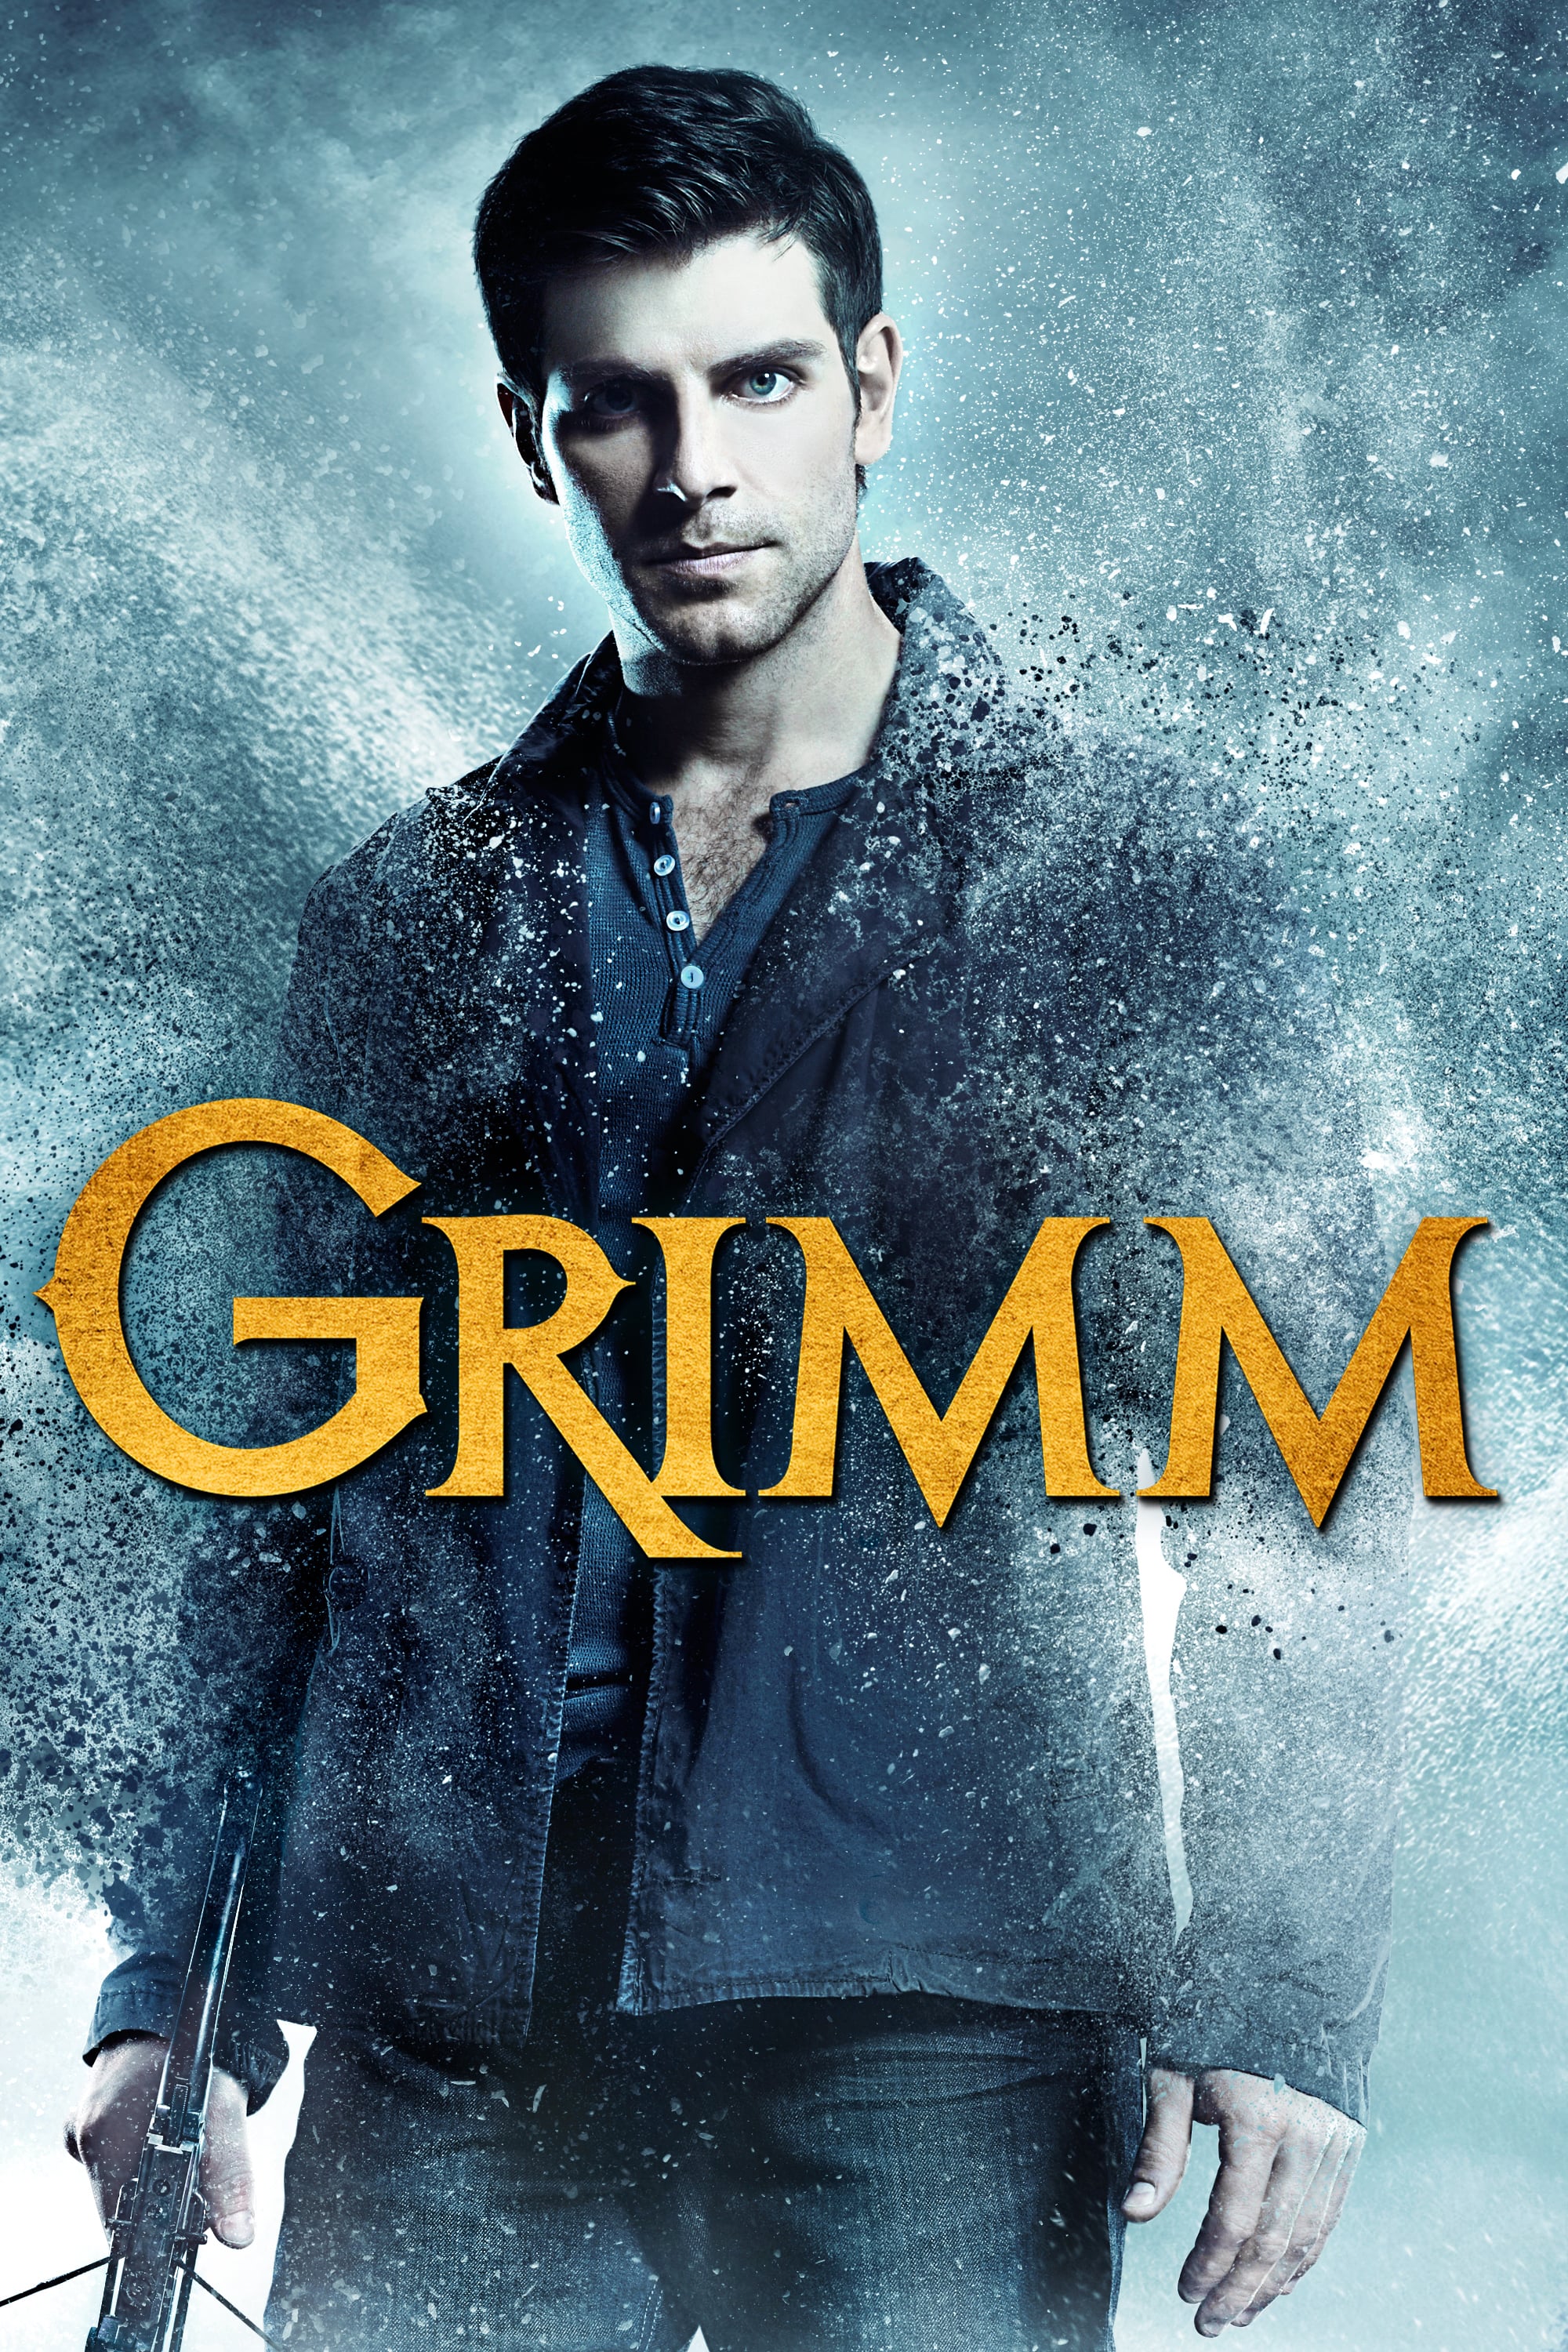 Grimm Picture